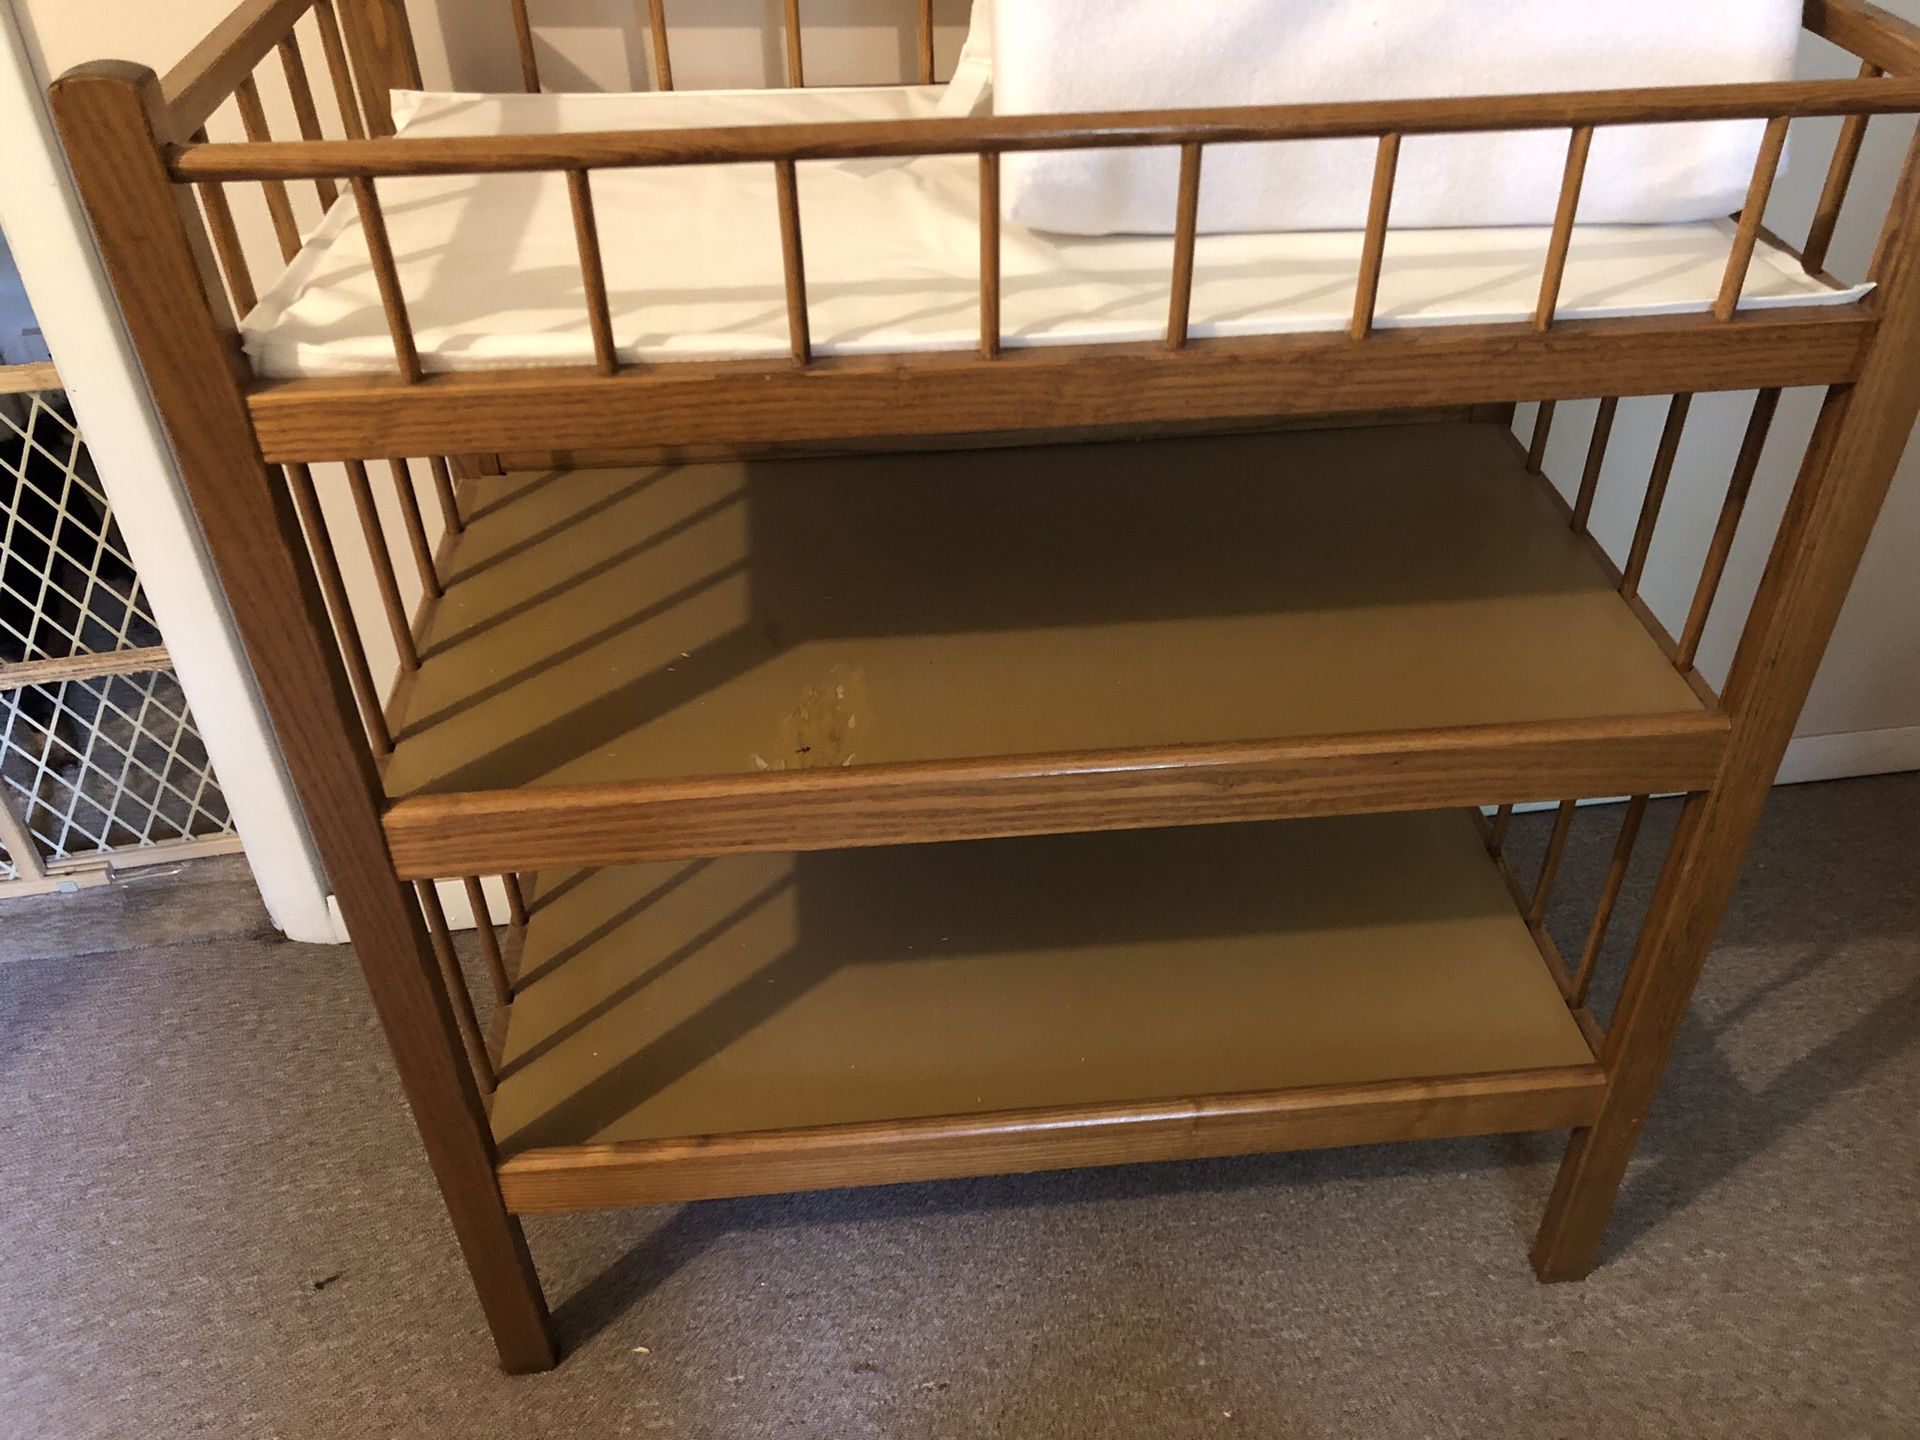 Changing table with pad and cover. Not used often. (Nursery for my grandson when he came to visit) Spot on table from lotion that leaked. Moving sale